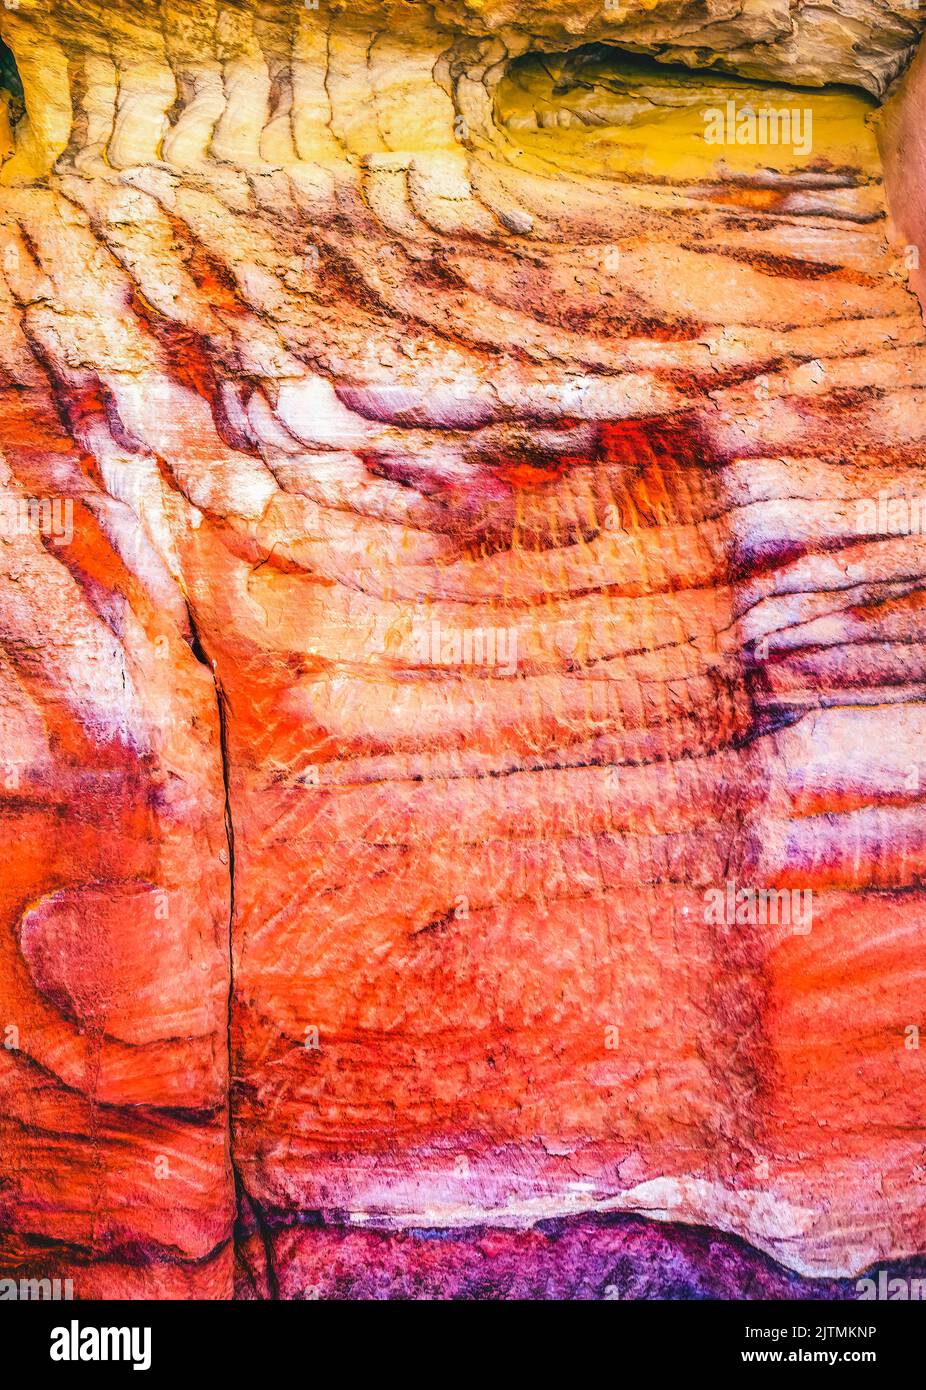 Red White Rock Abstract Petra Jordan Built by Nabataens in 200 BC to 400 AD Canyon walls create many abstracts close up Stock Photo